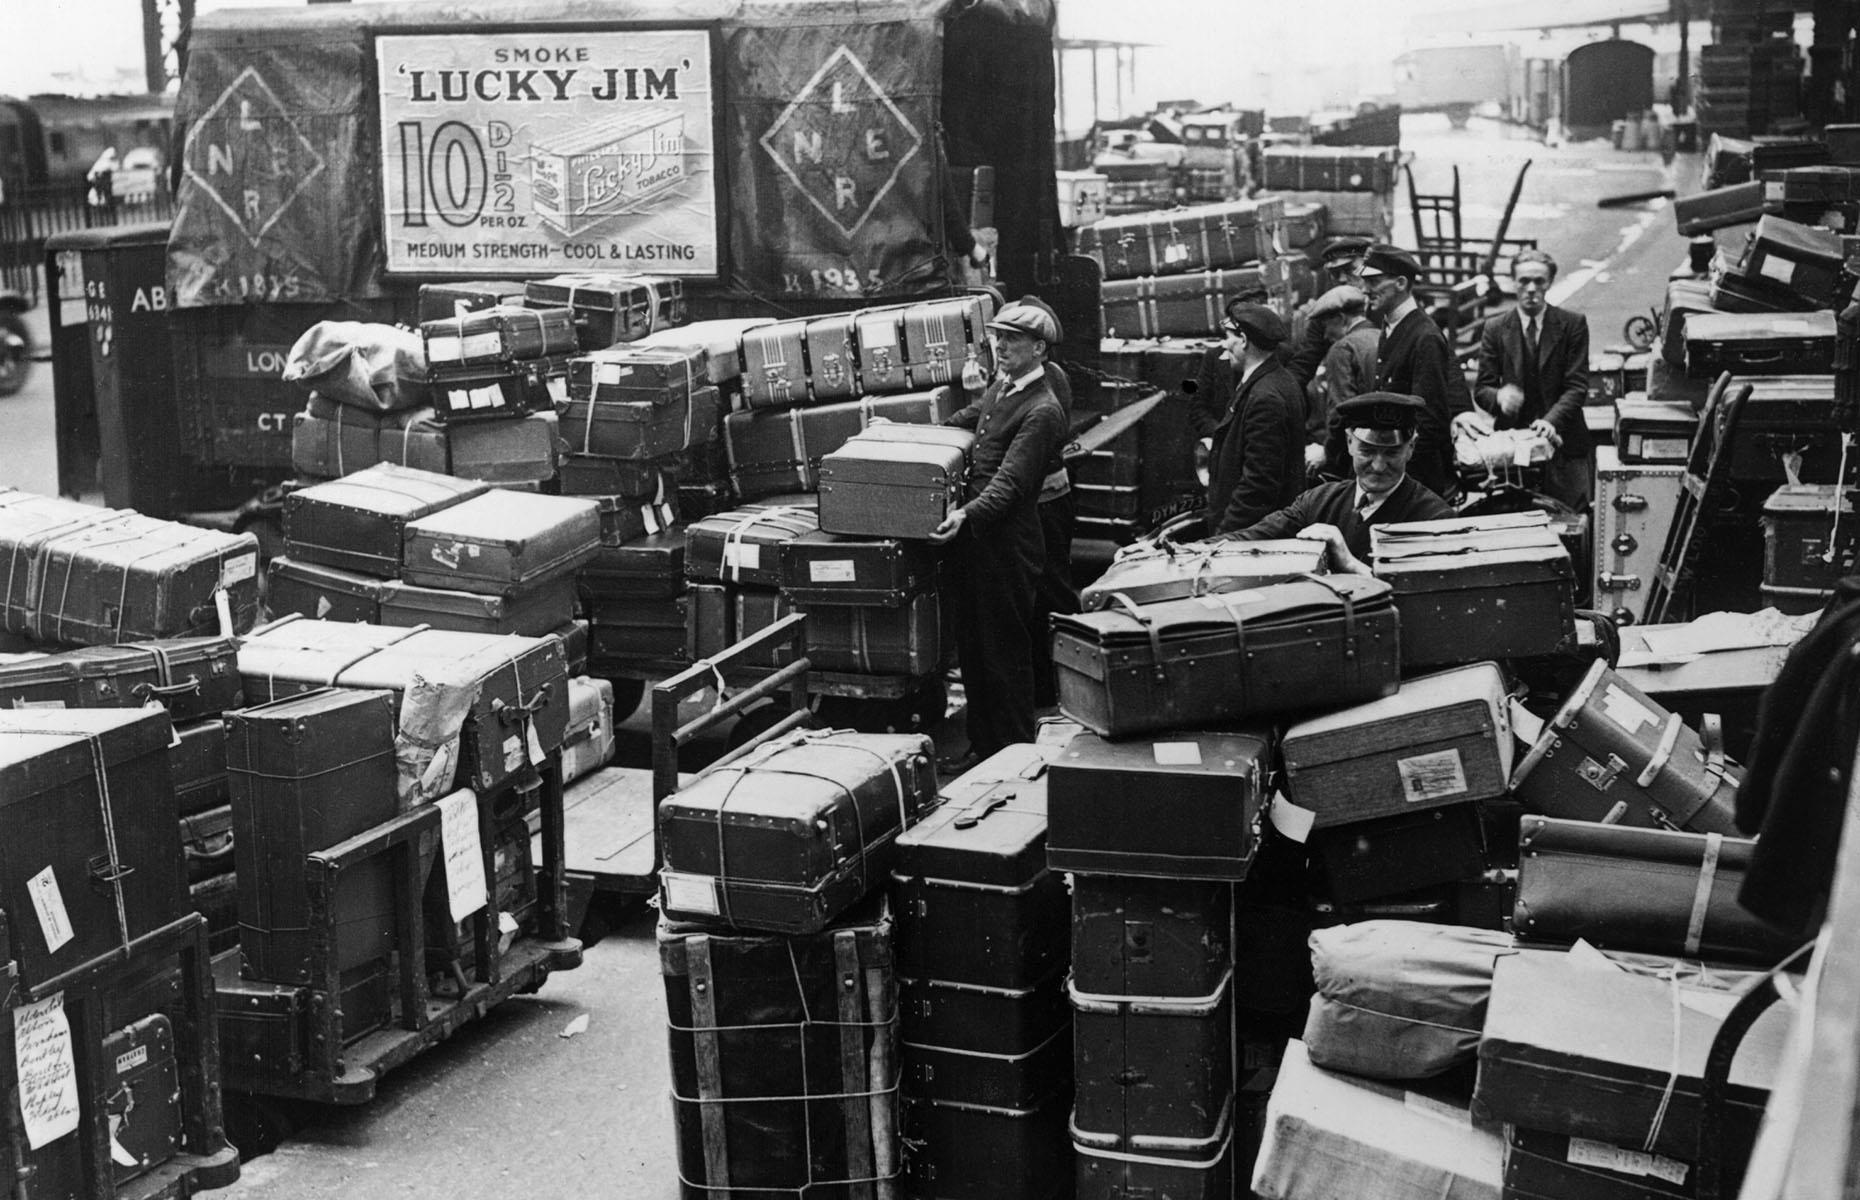 <p>Whether it's train travel in the 1930s or jetting away on an aeroplane in the 2000s, there's still baggage to be loaded and unloaded. Here baggage men unload passengers' suitcases from a train that's arrived at London Waterloo station. <a href="https://www.loveexploring.com/galleries/86315/how-air-travel-has-changed-in-every-decade-from-the-1920s?page=1">Take a look at how air travel has changed in the last 100 years</a>.</p>